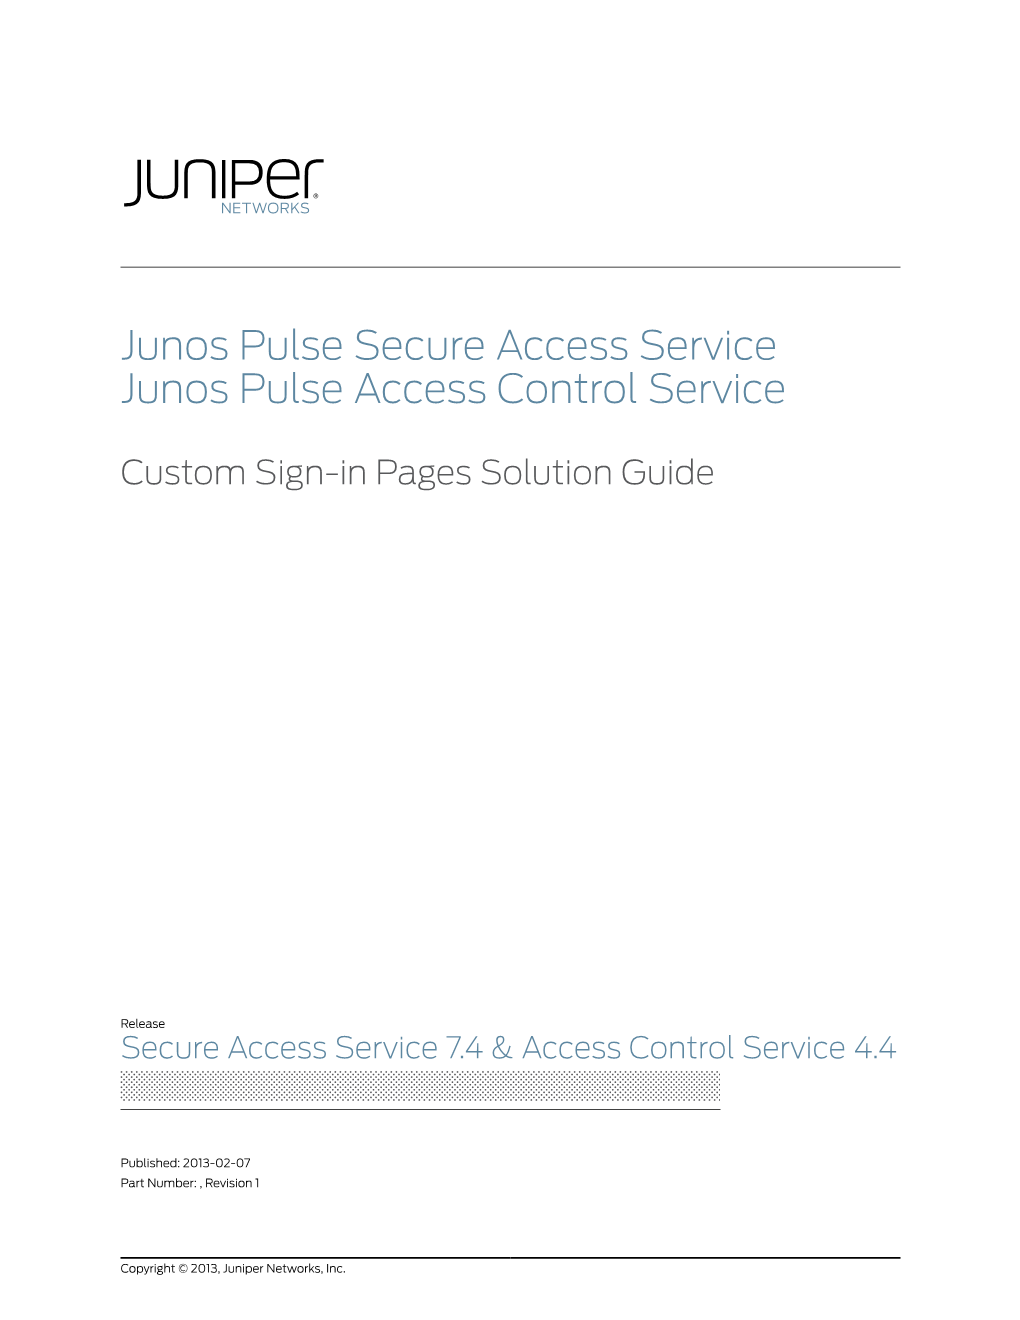 Custom Sign-In Pages Solution Guide